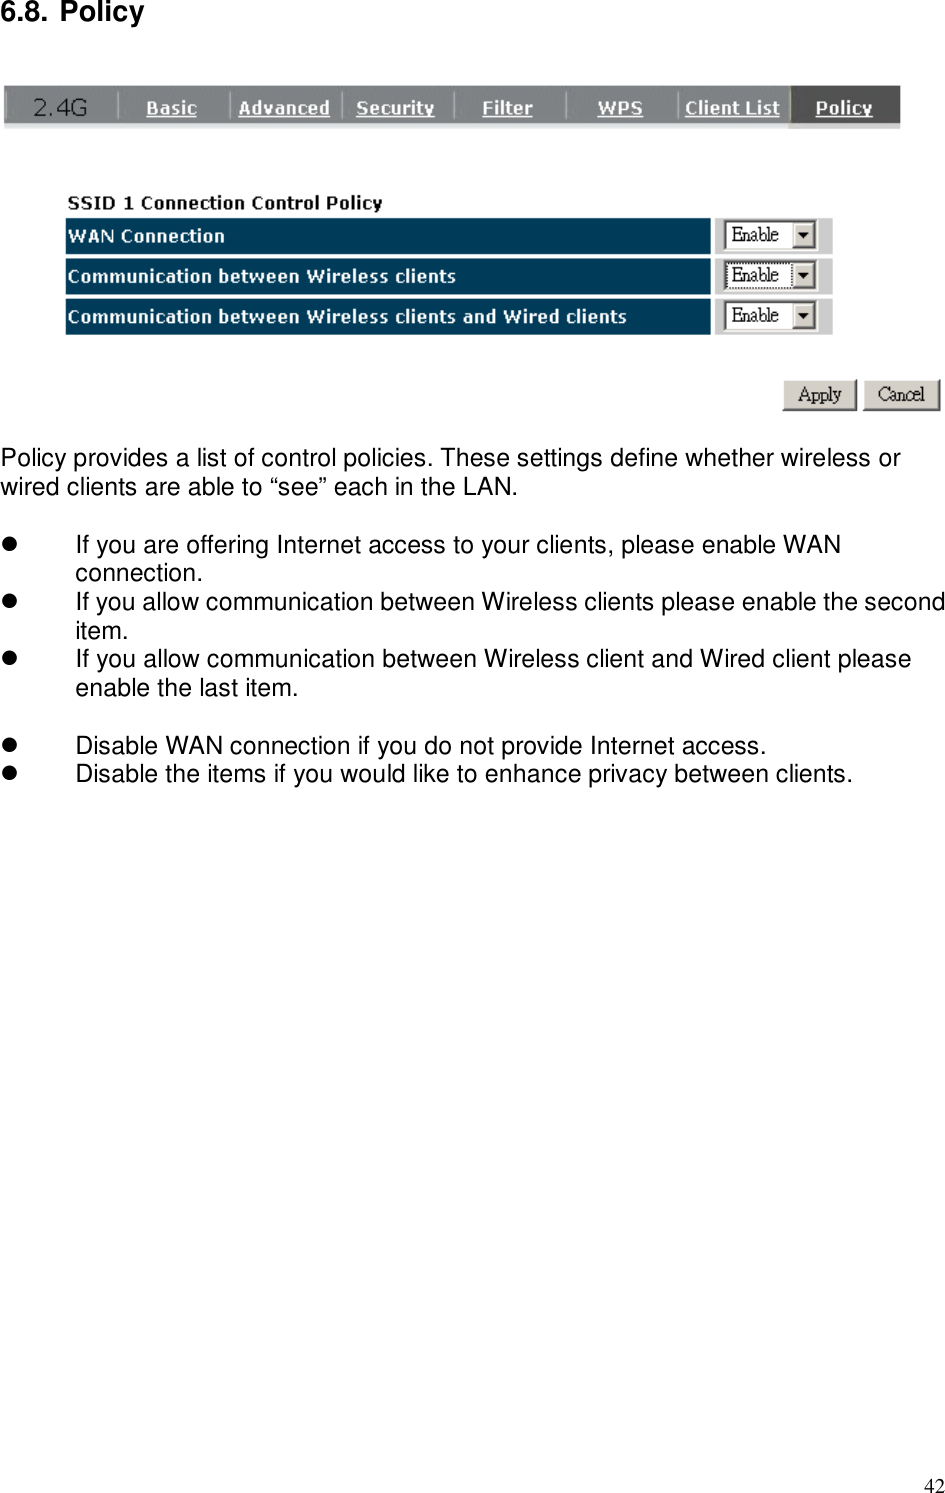  42 6.8. Policy    Policy provides a list of control policies. These settings define whether wireless or wired clients are able to “see” each in the LAN.      If you are offering Internet access to your clients, please enable WAN connection.   If you allow communication between Wireless clients please enable the second item.   If you allow communication between Wireless client and Wired client please enable the last item.    Disable WAN connection if you do not provide Internet access.   Disable the items if you would like to enhance privacy between clients.  